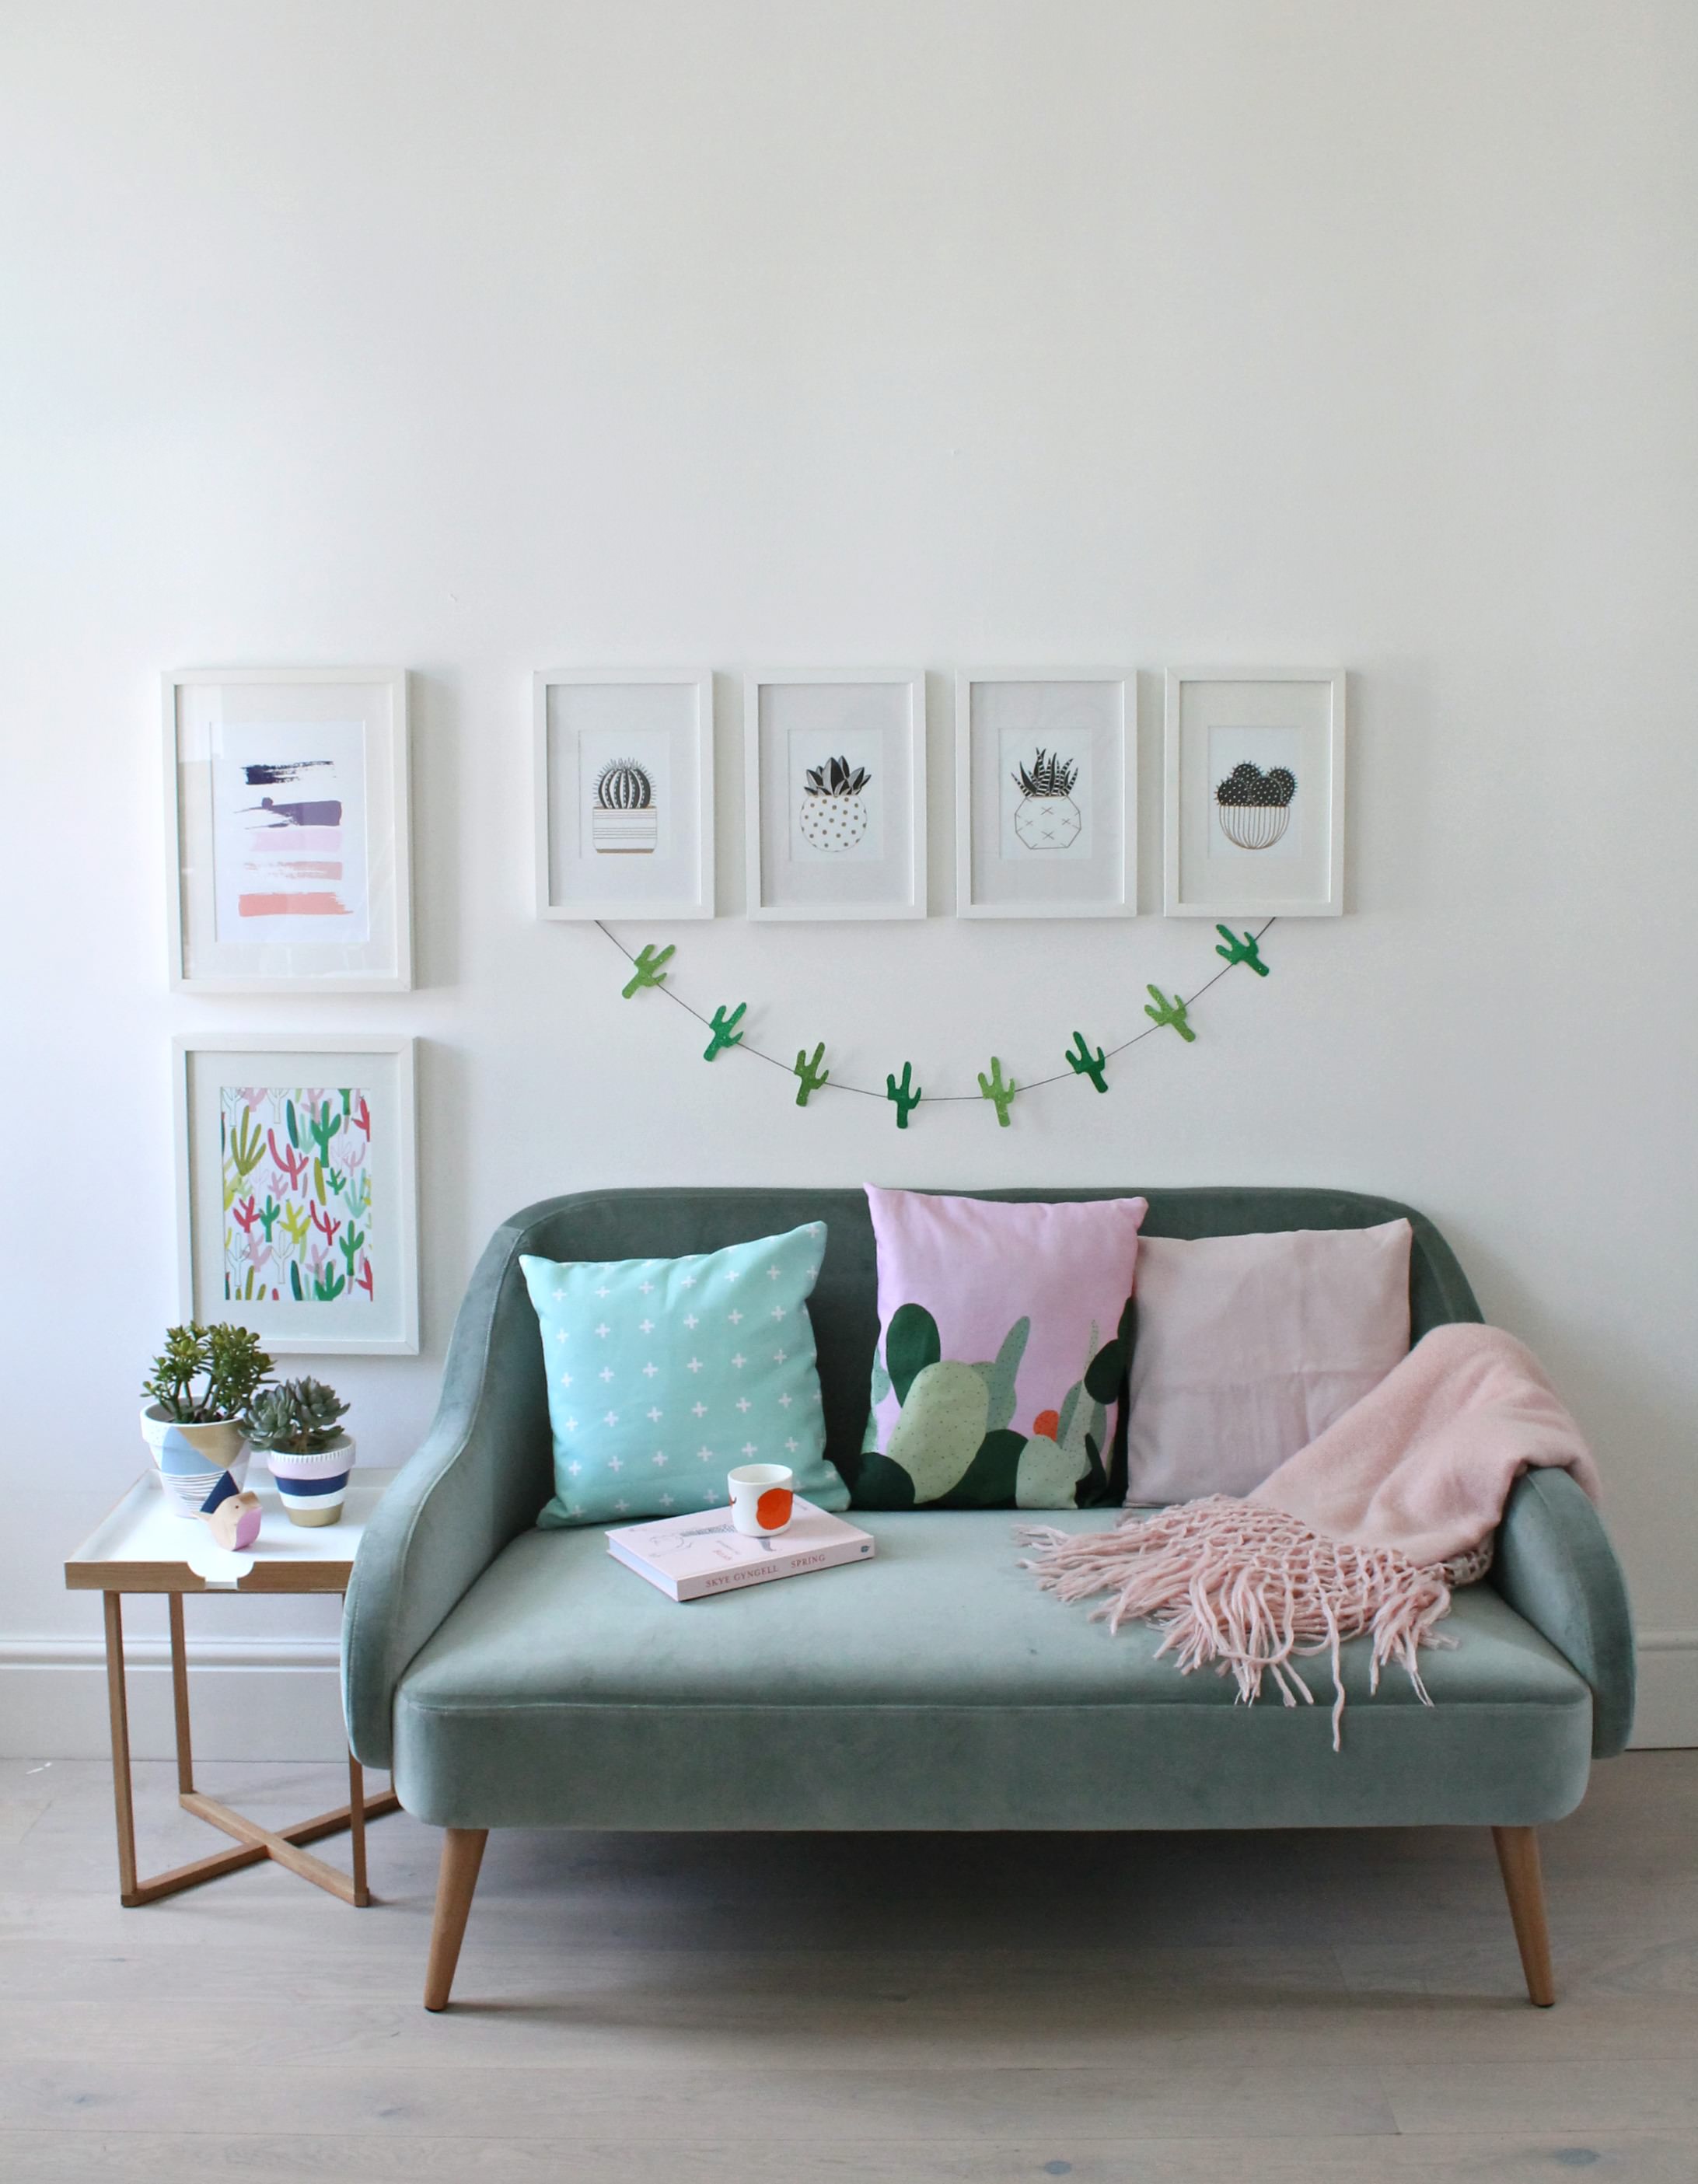 Cactus-trend-for-the-home-Etsy-Awards-photo-by-Little-Big-Bell